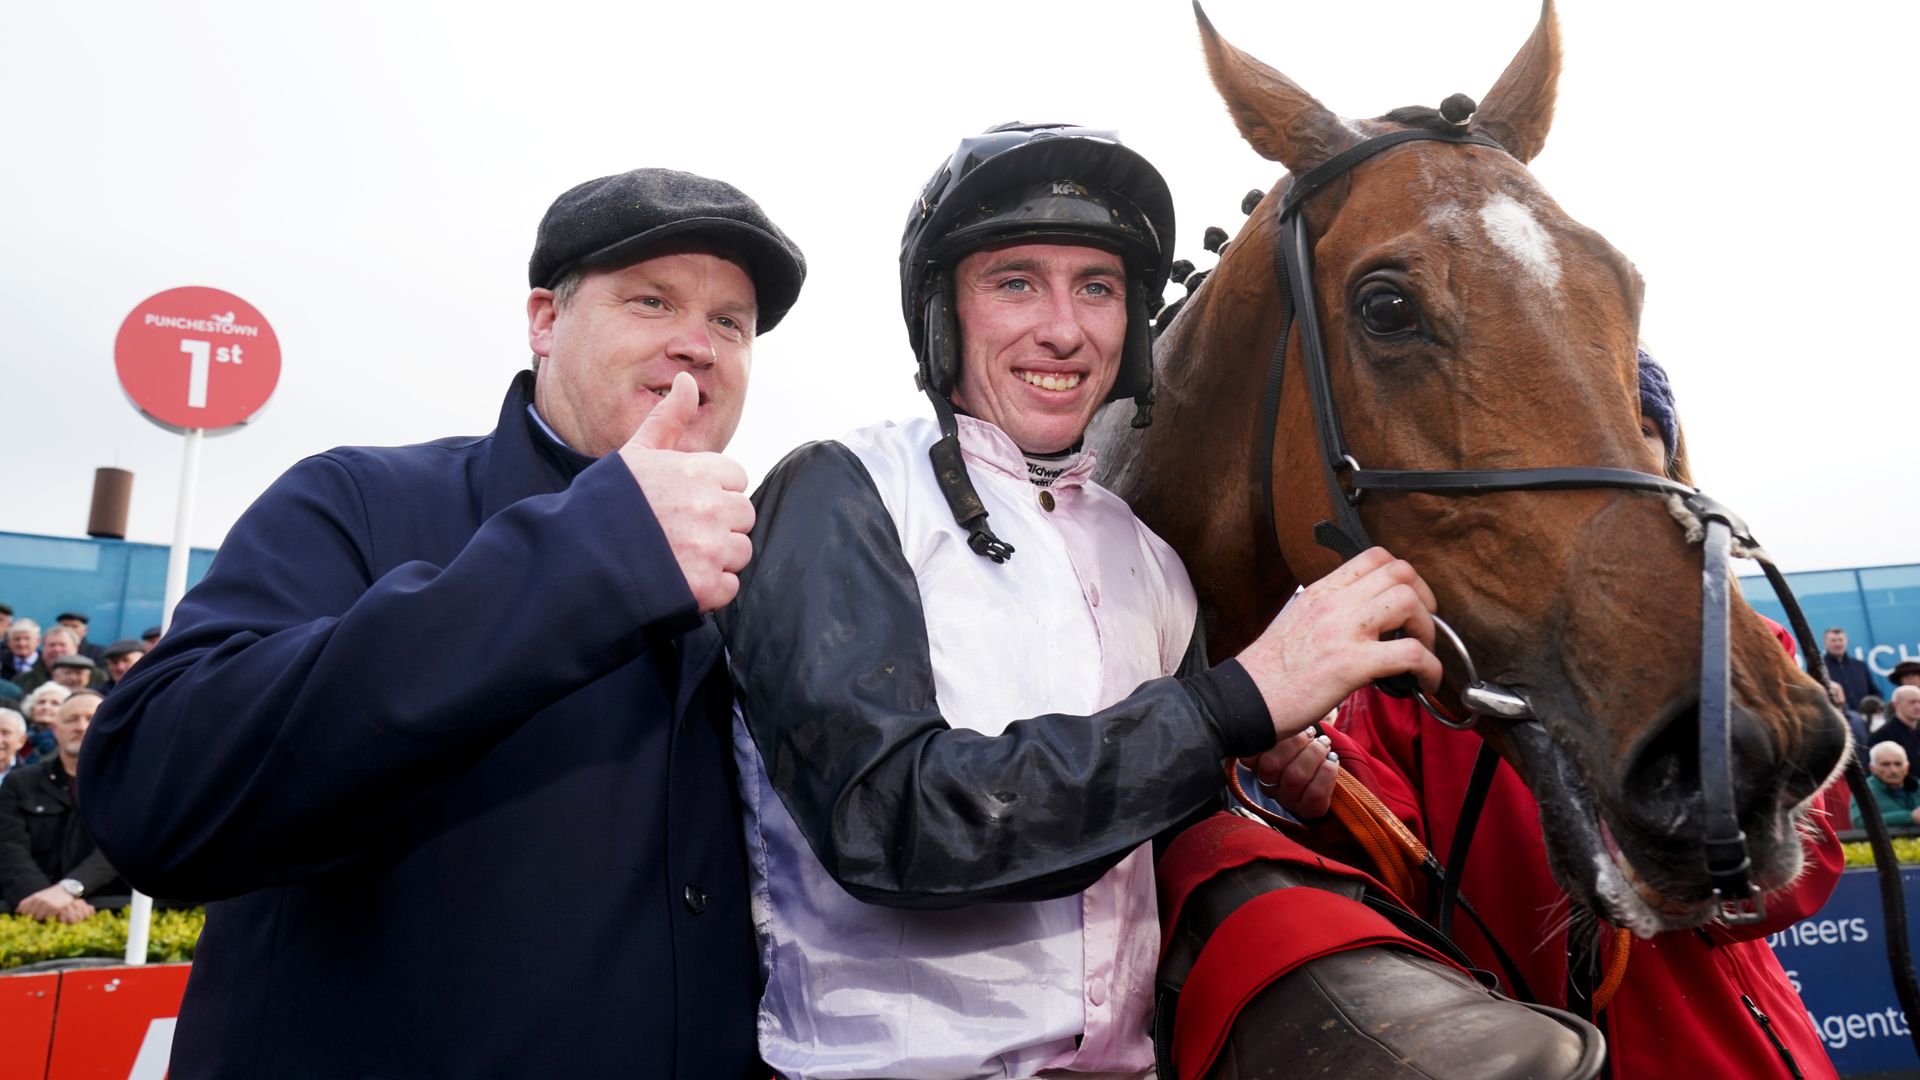 Teahupoo crowned Punchestown staying king with stylish success